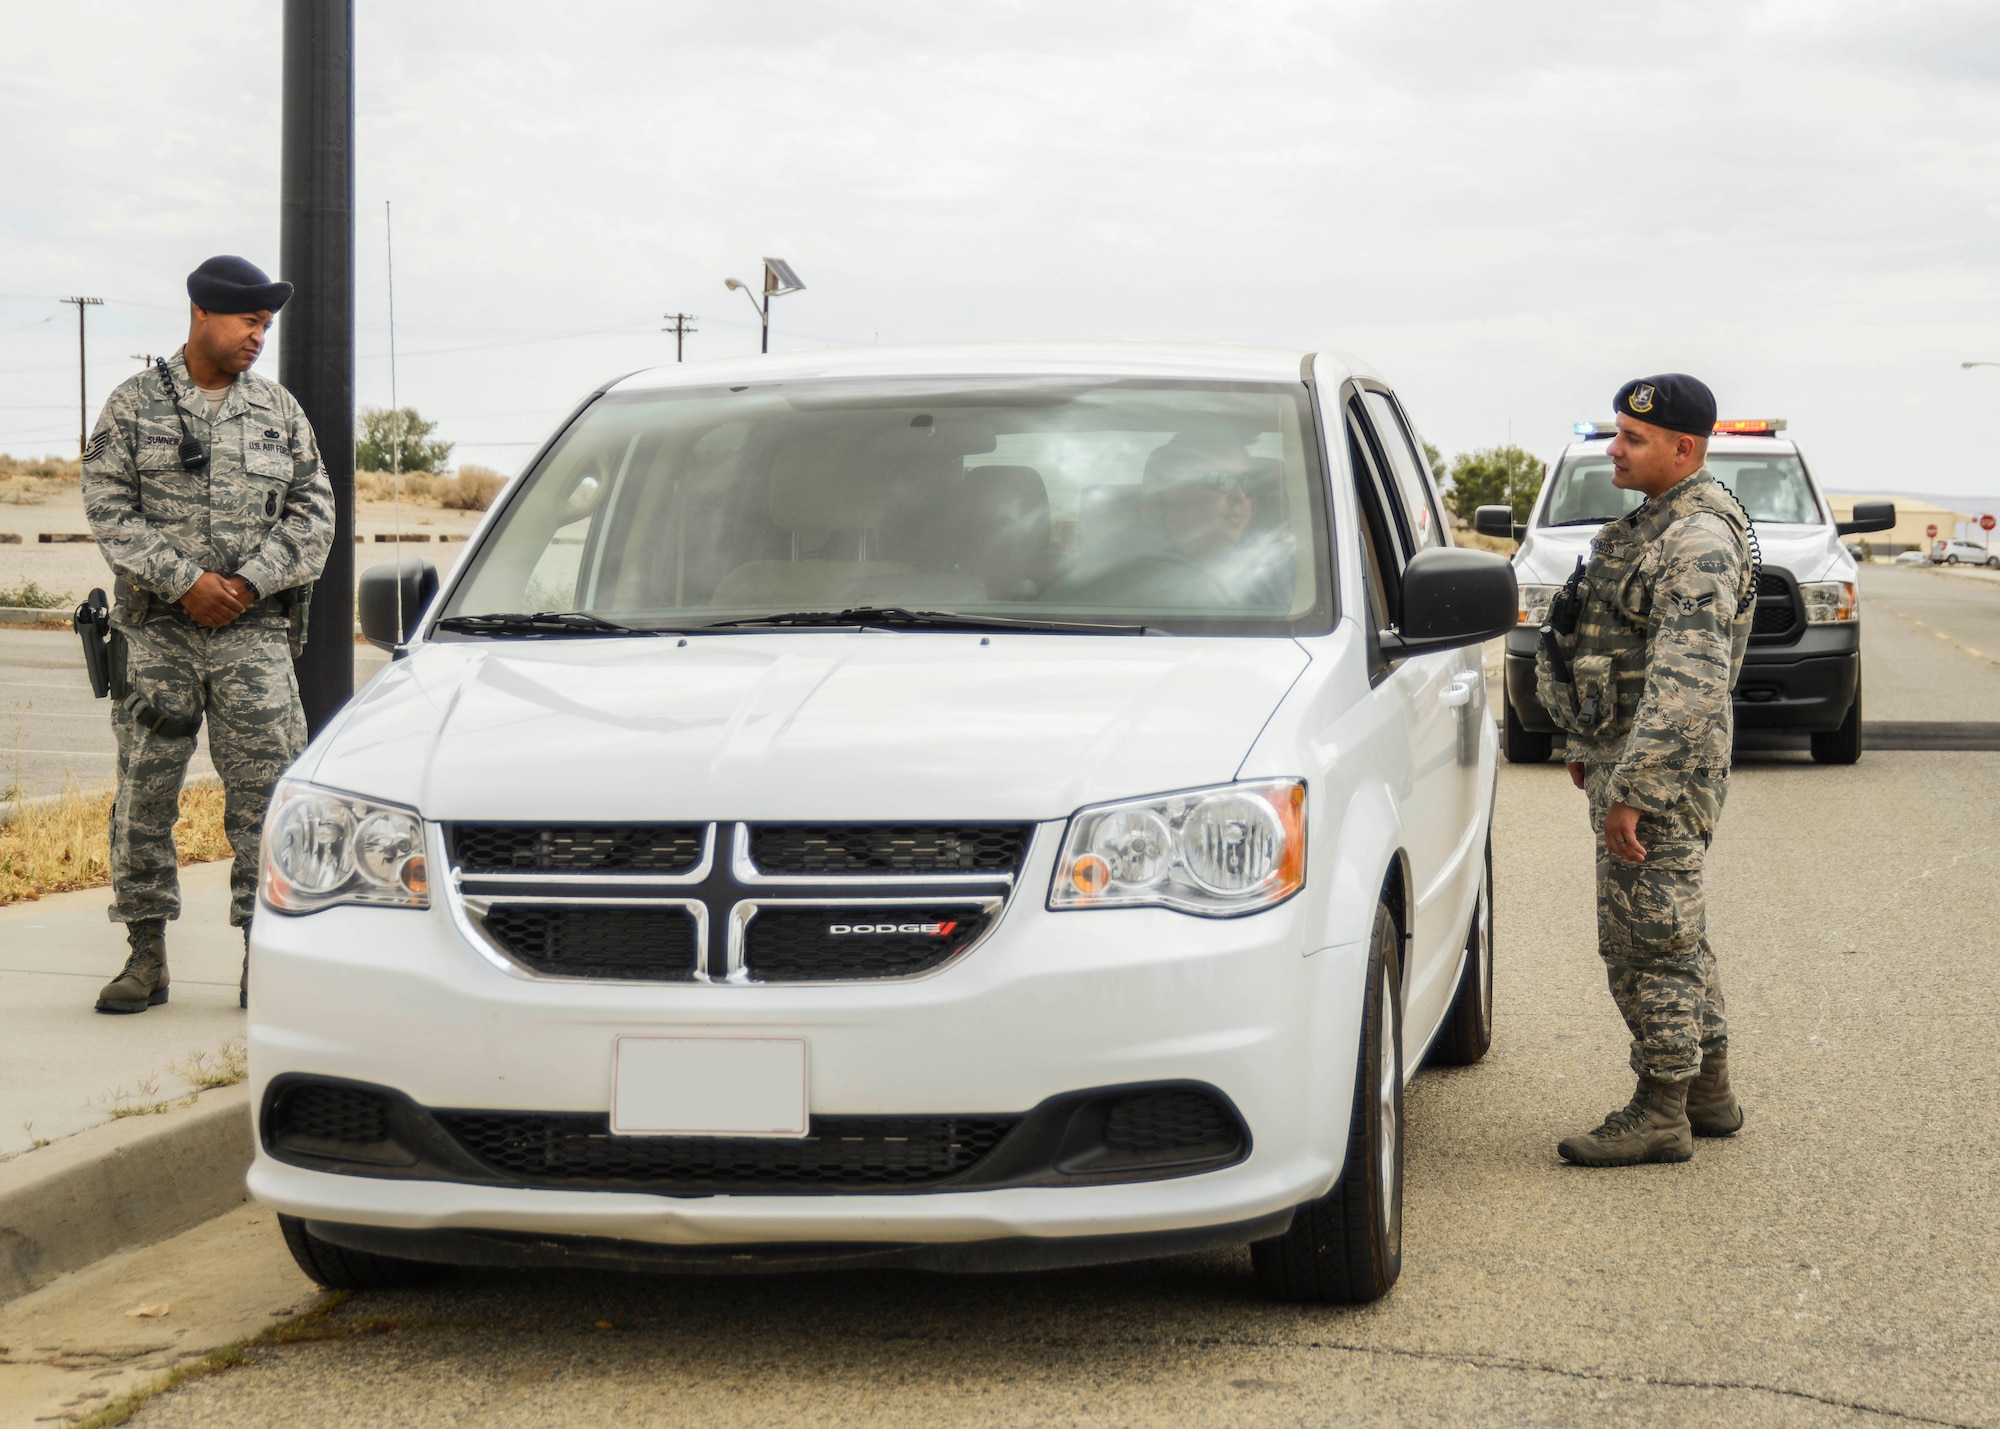 412th Security Forces Squadron defenders pull over a vehicle for speeding. (U.S. Air Force photo by Rebecca Amber) 